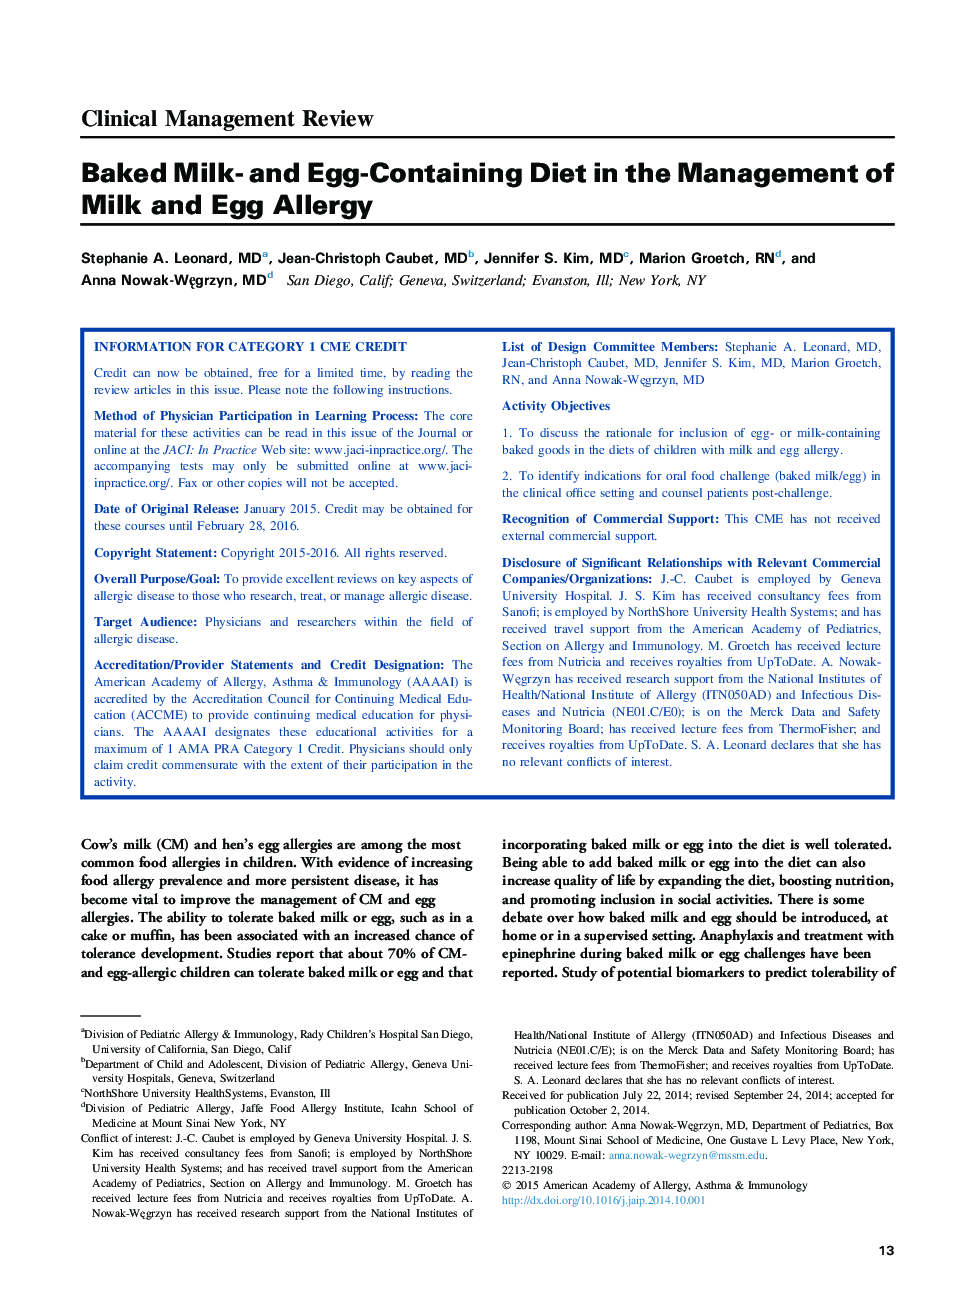 Baked Milk- and Egg-Containing Diet in the Management of Milk and Egg Allergy